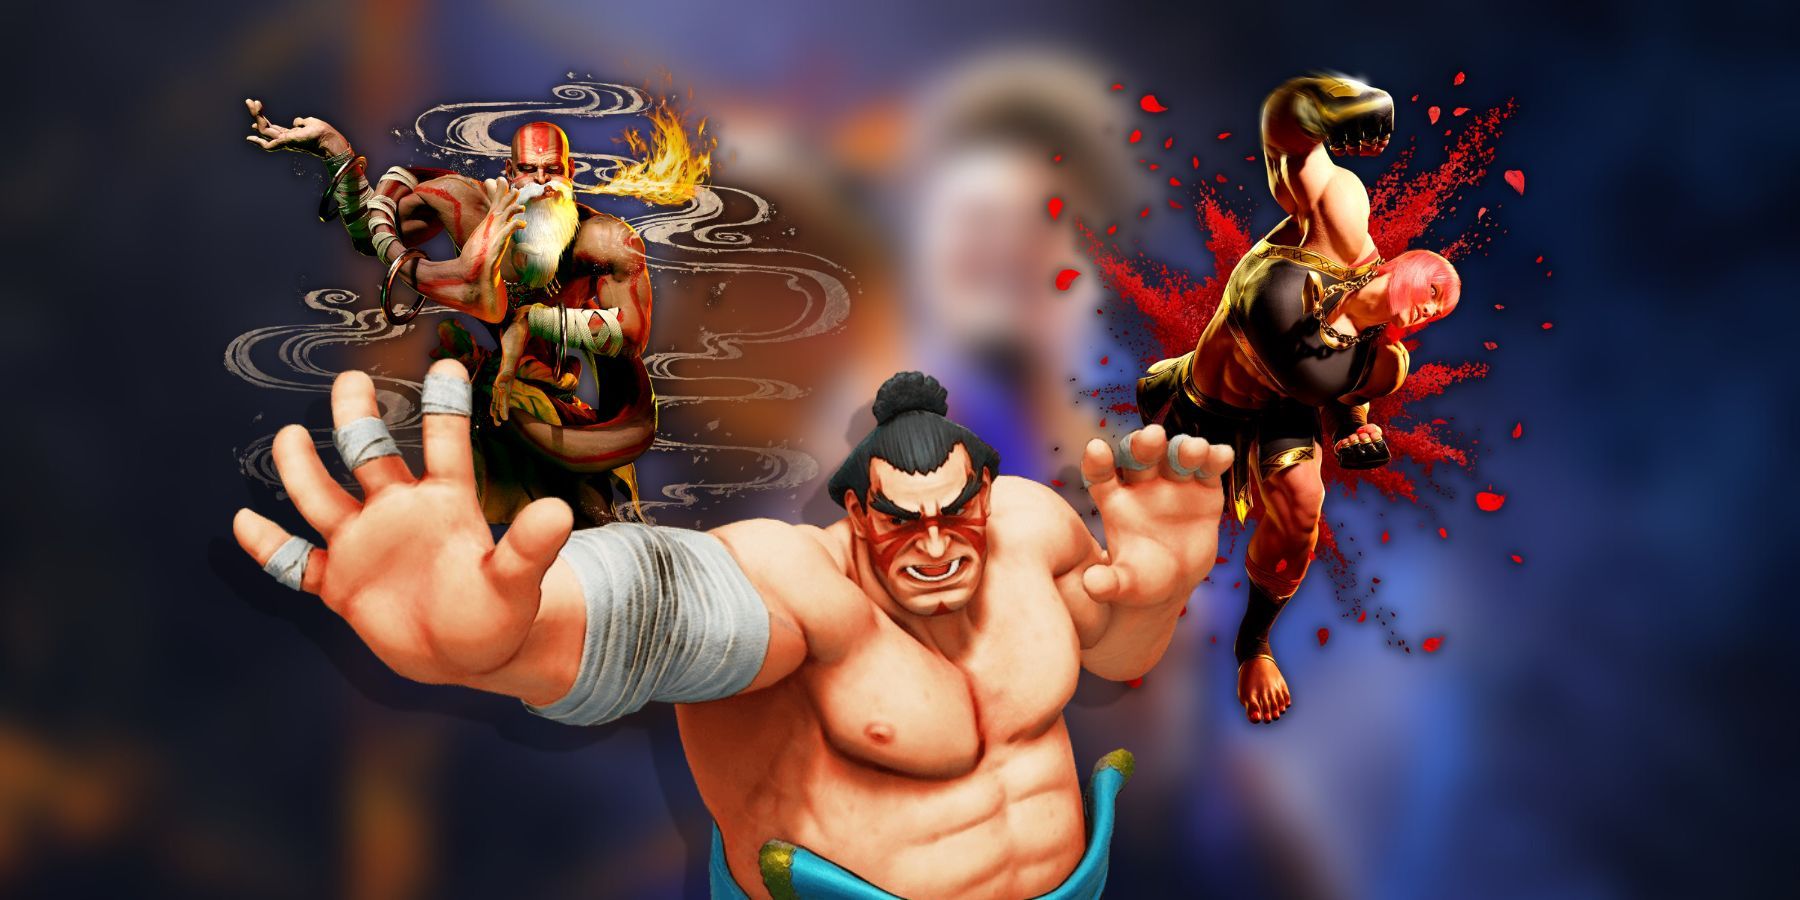 image showing the s-tier characters of street fighter 6.